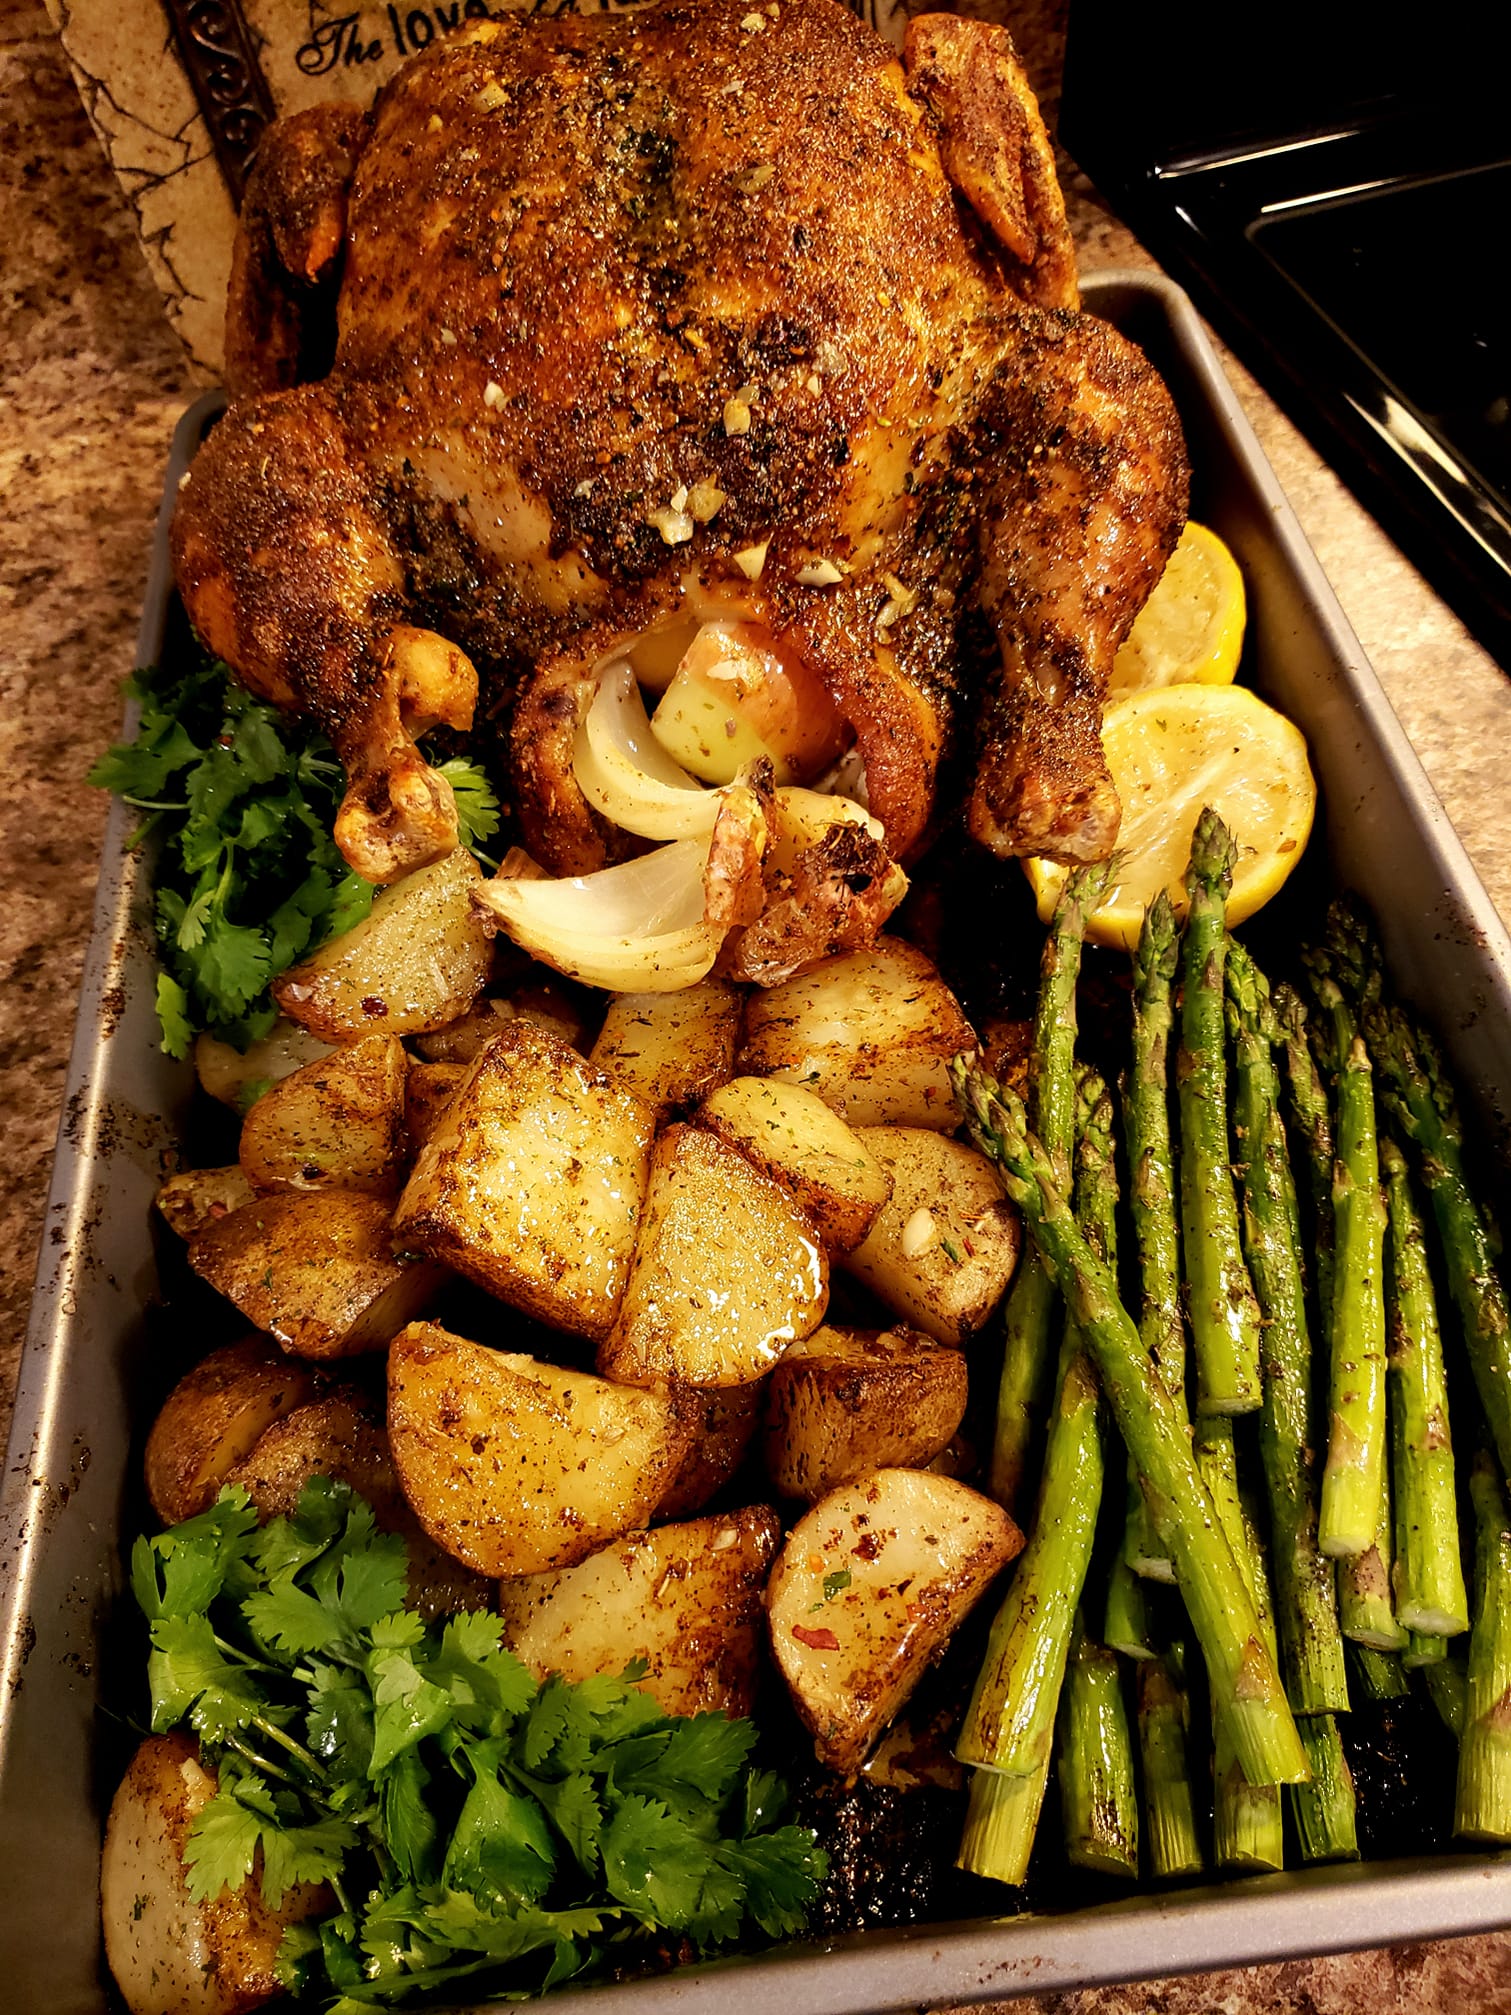 Roasted lemon thyme chicken, garlic butter roasted potatoes and asparagus